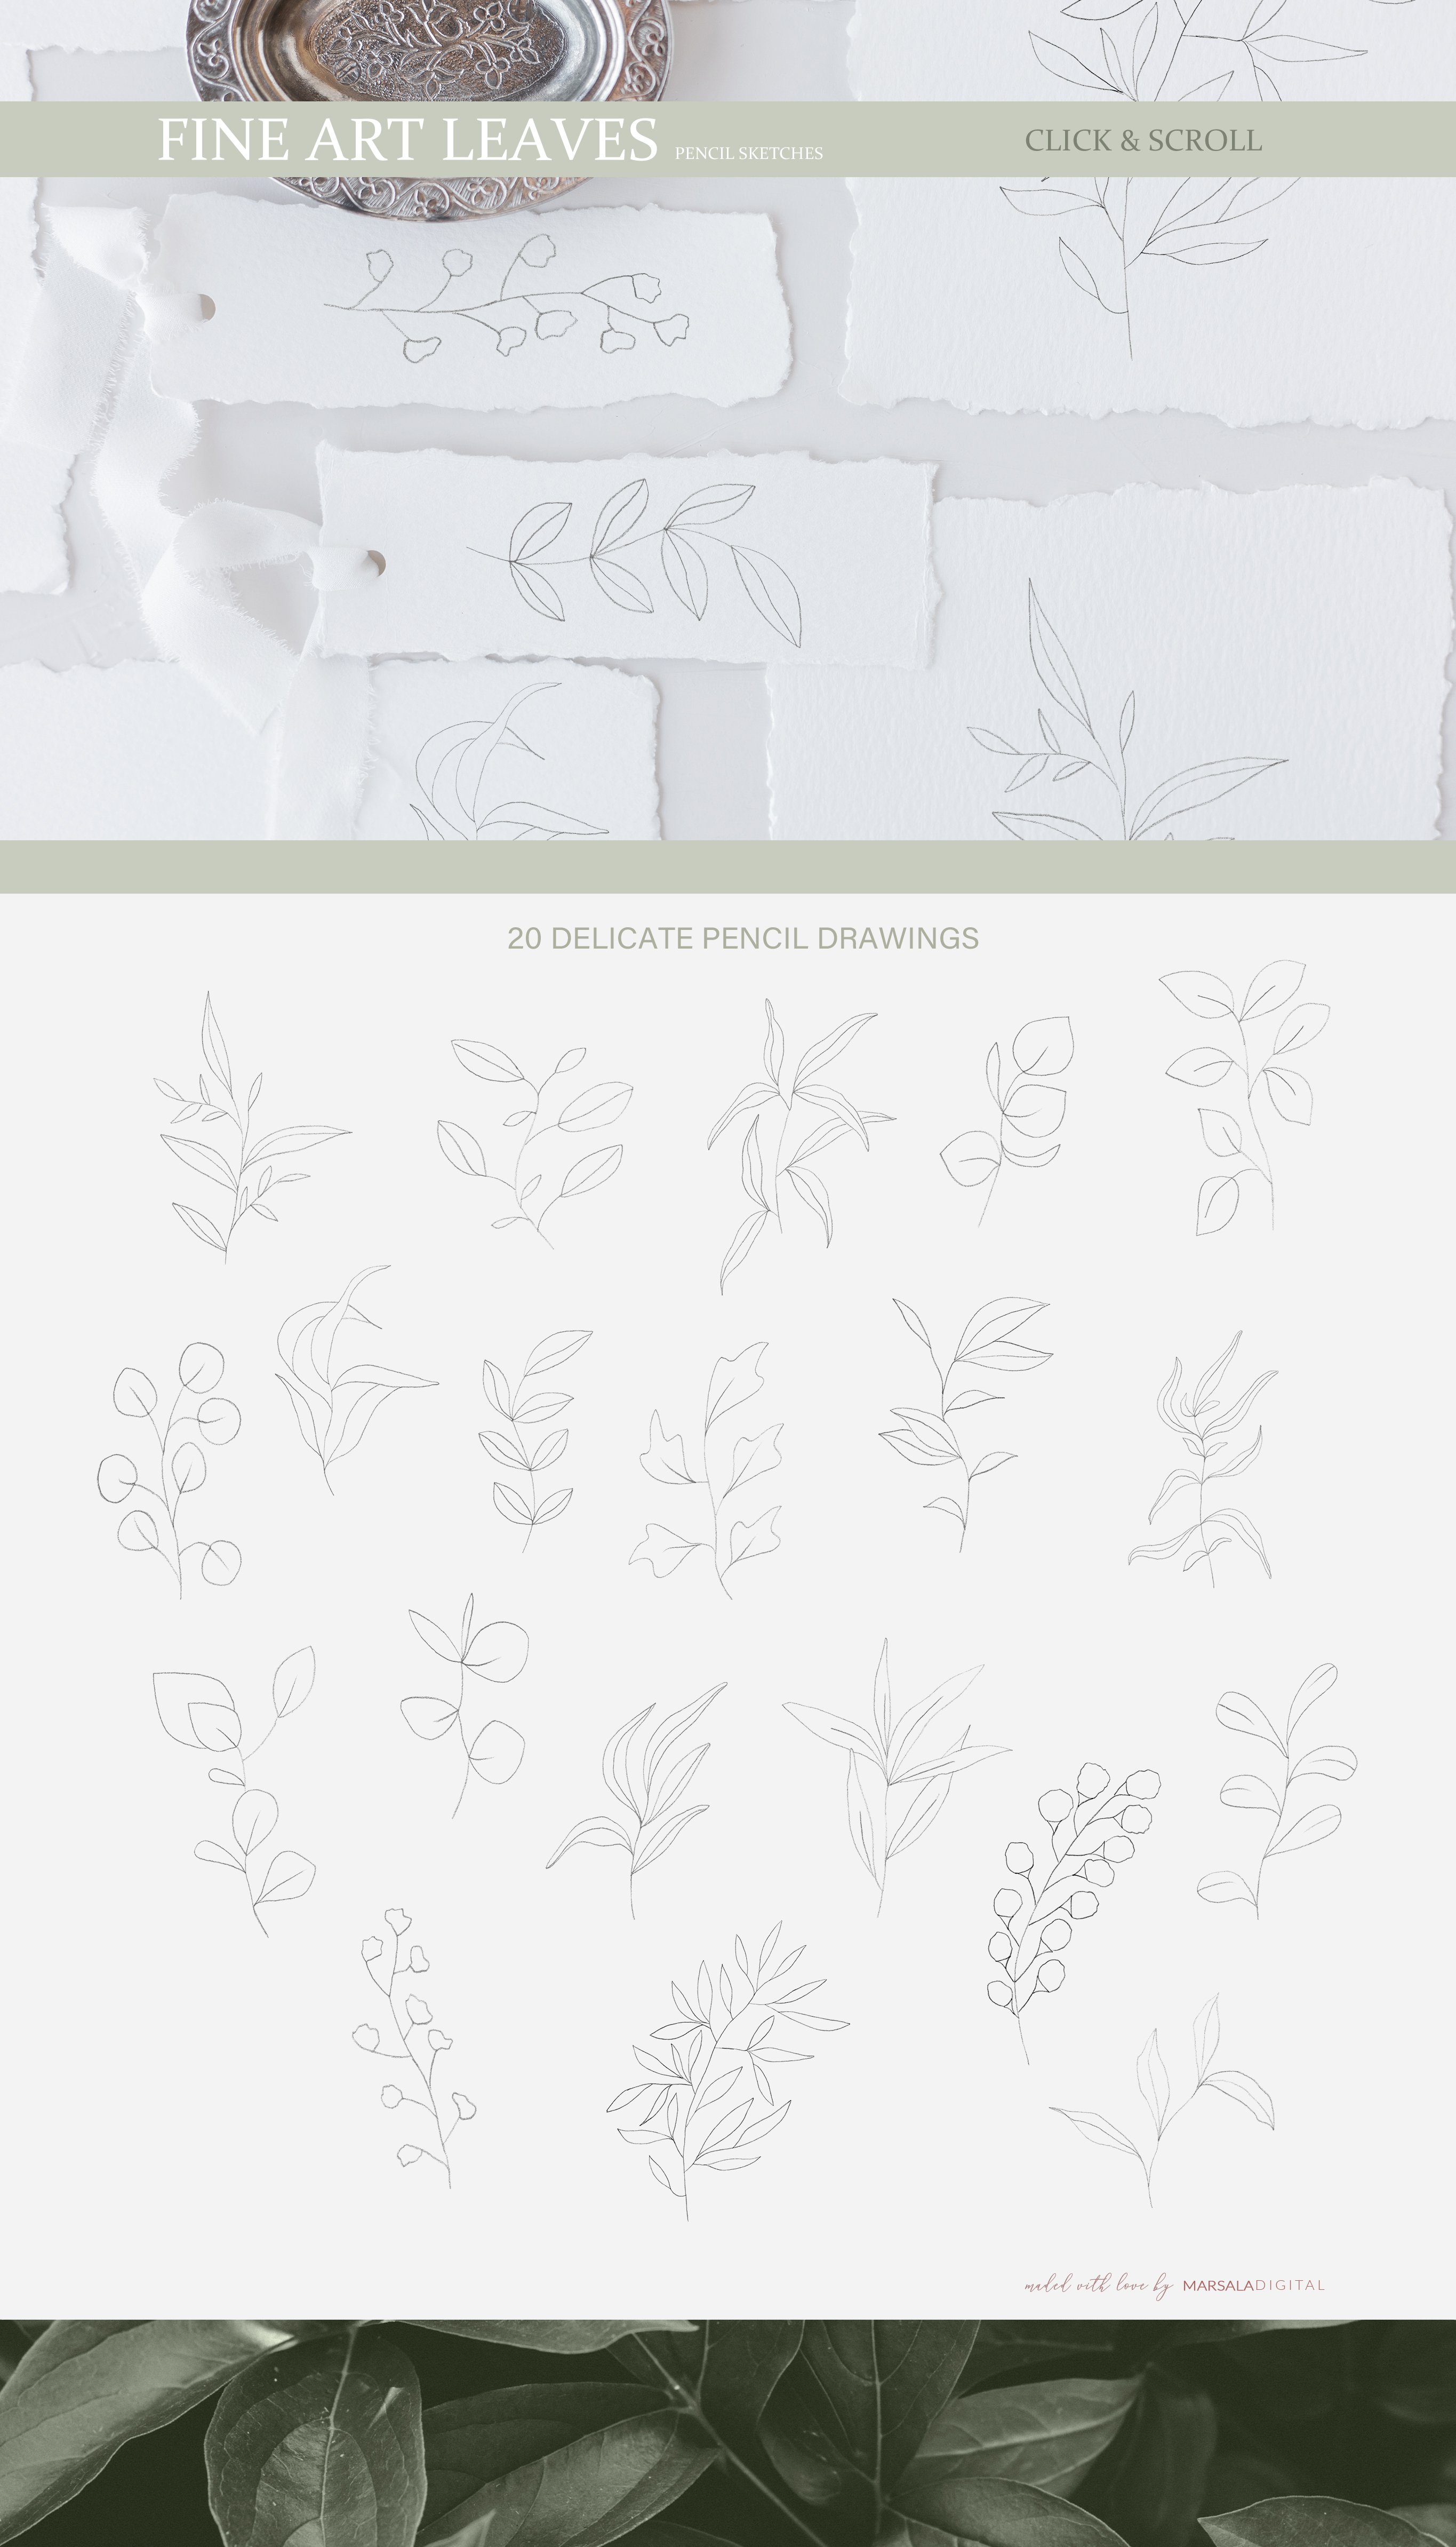 Fine Art Leaves - Pencil Sketches preview image.